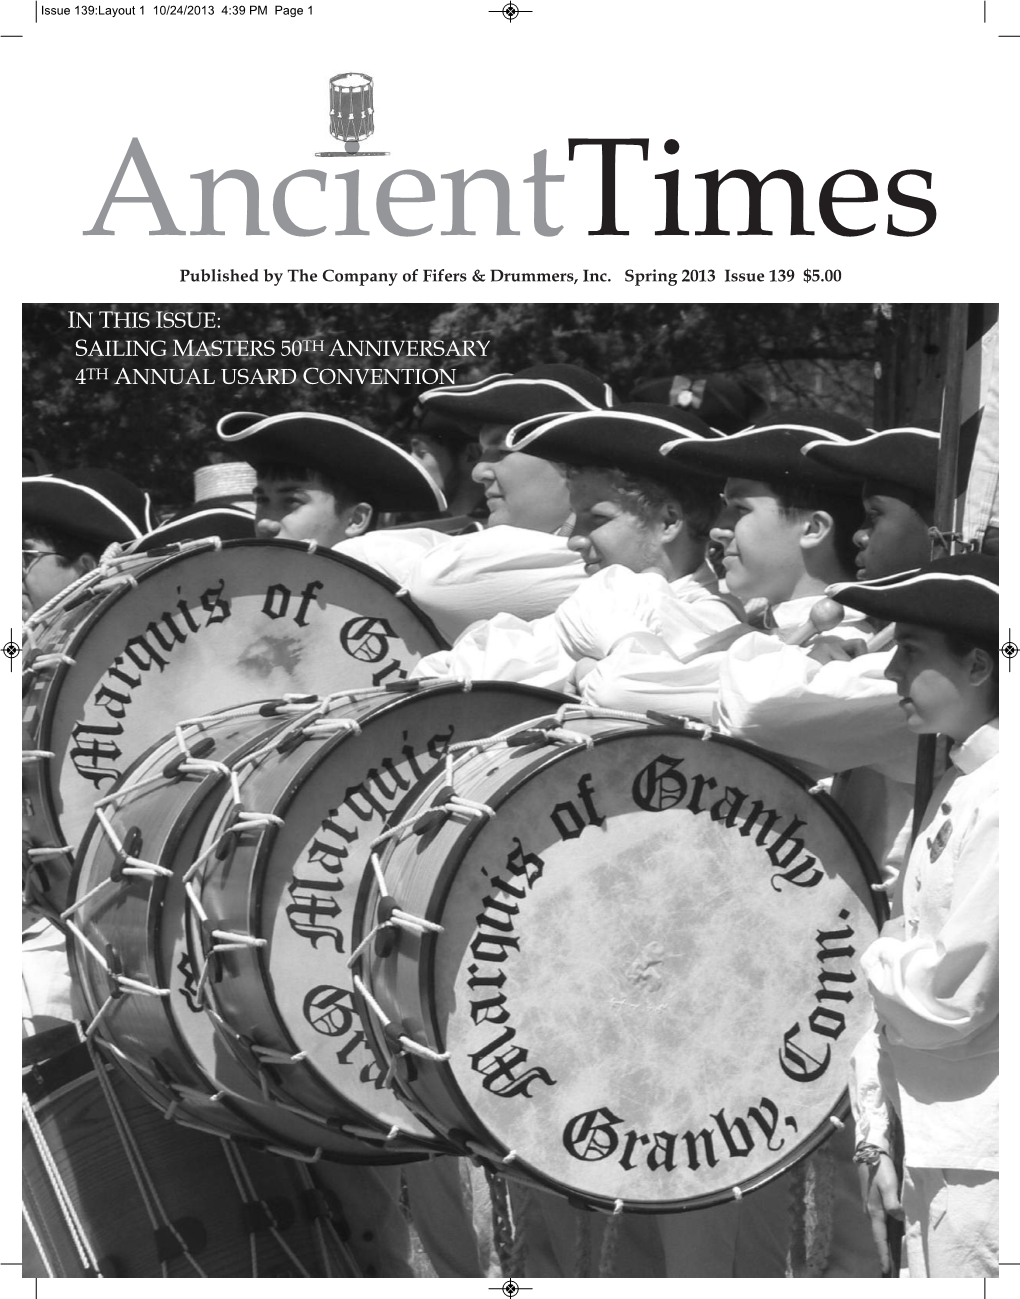 Issue 139:Layout 1 10/24/2013 4:39 PM Page 1 I Ancienttimes Published by the Company of Fifers & Drummers, Inc